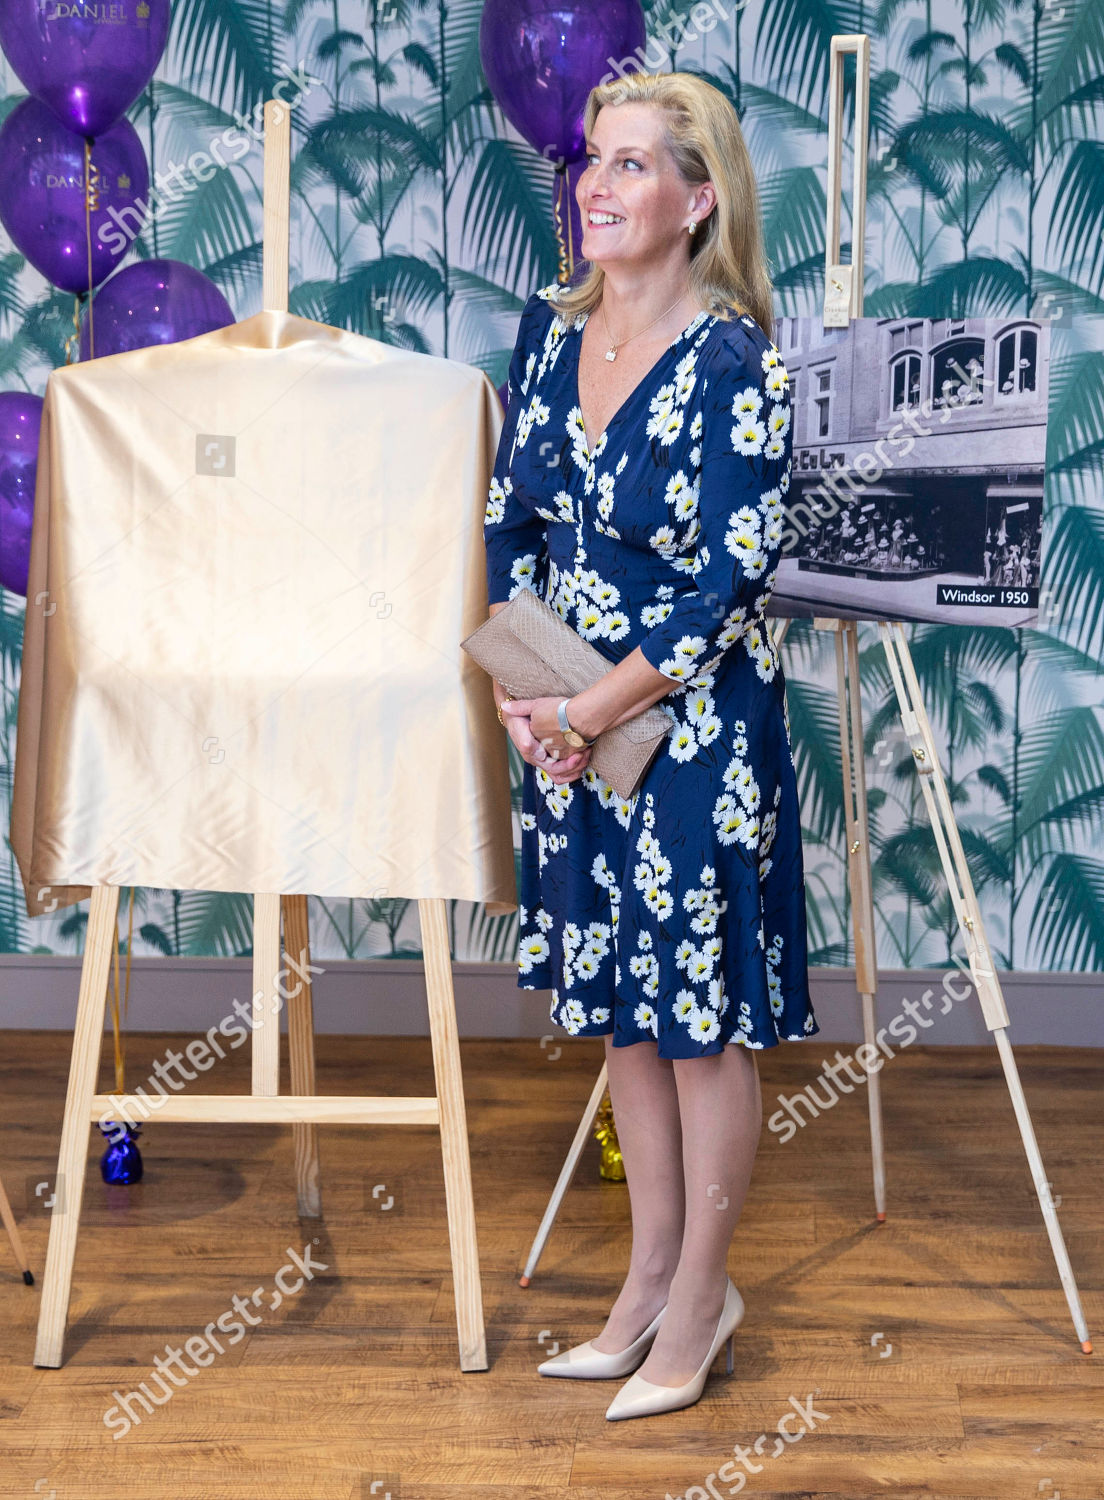 sophie-countess-of-wessex-visits-the-daniel-department-store-windsor-uk-shutterstock-editorial-9885078i.jpg